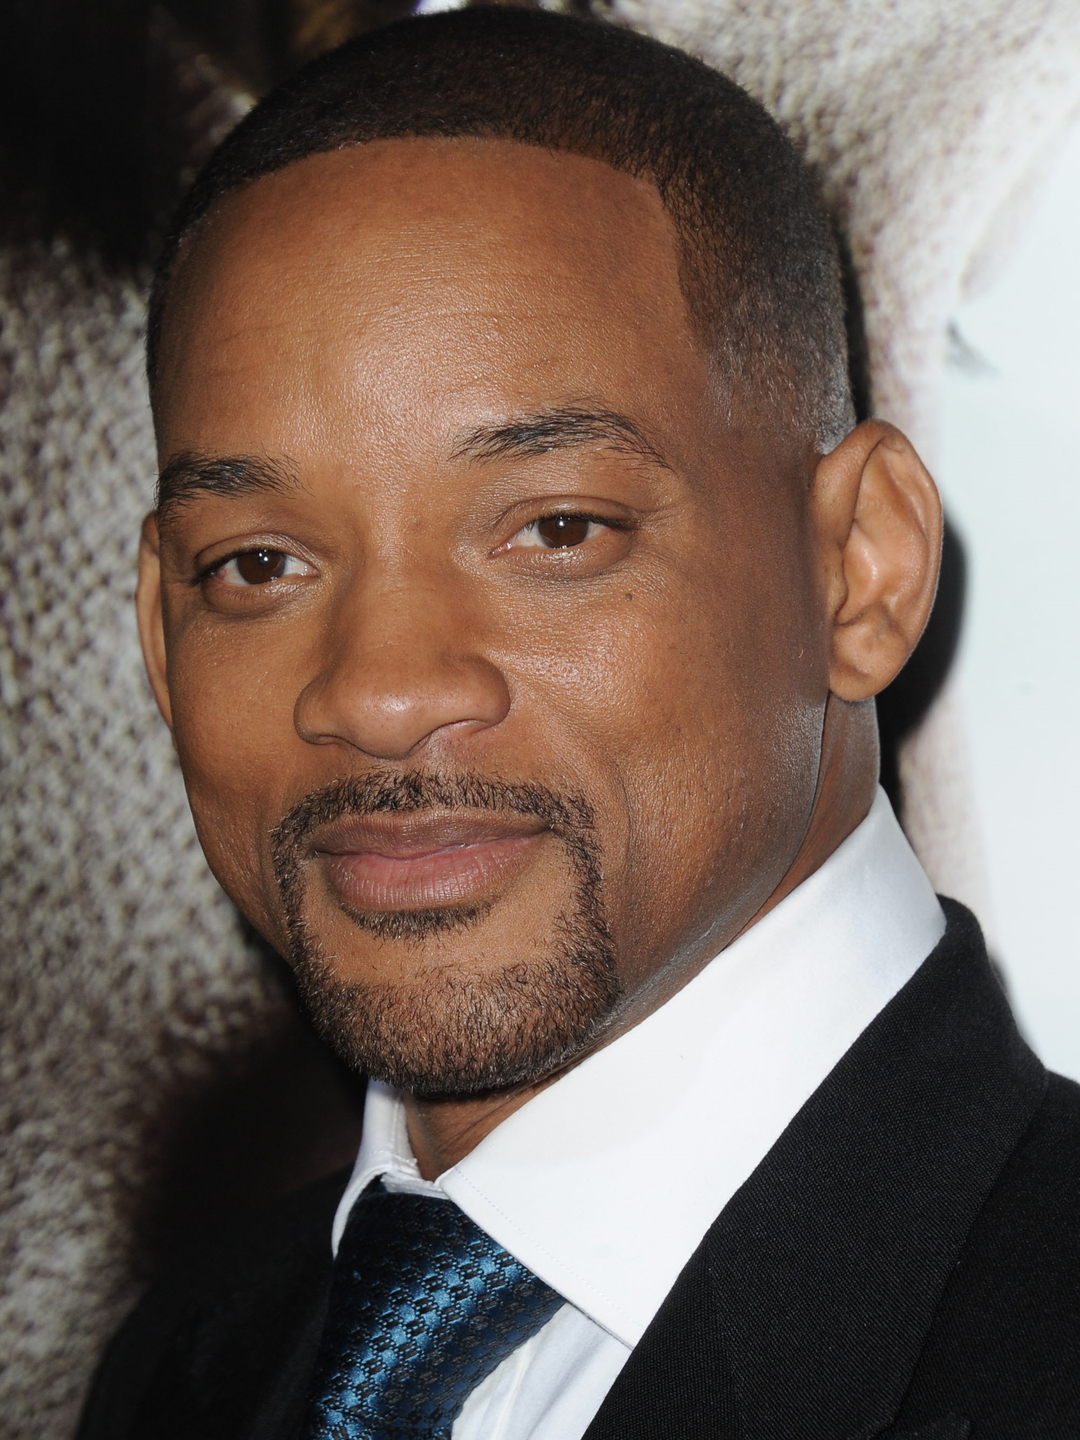 Will Smith where did he study